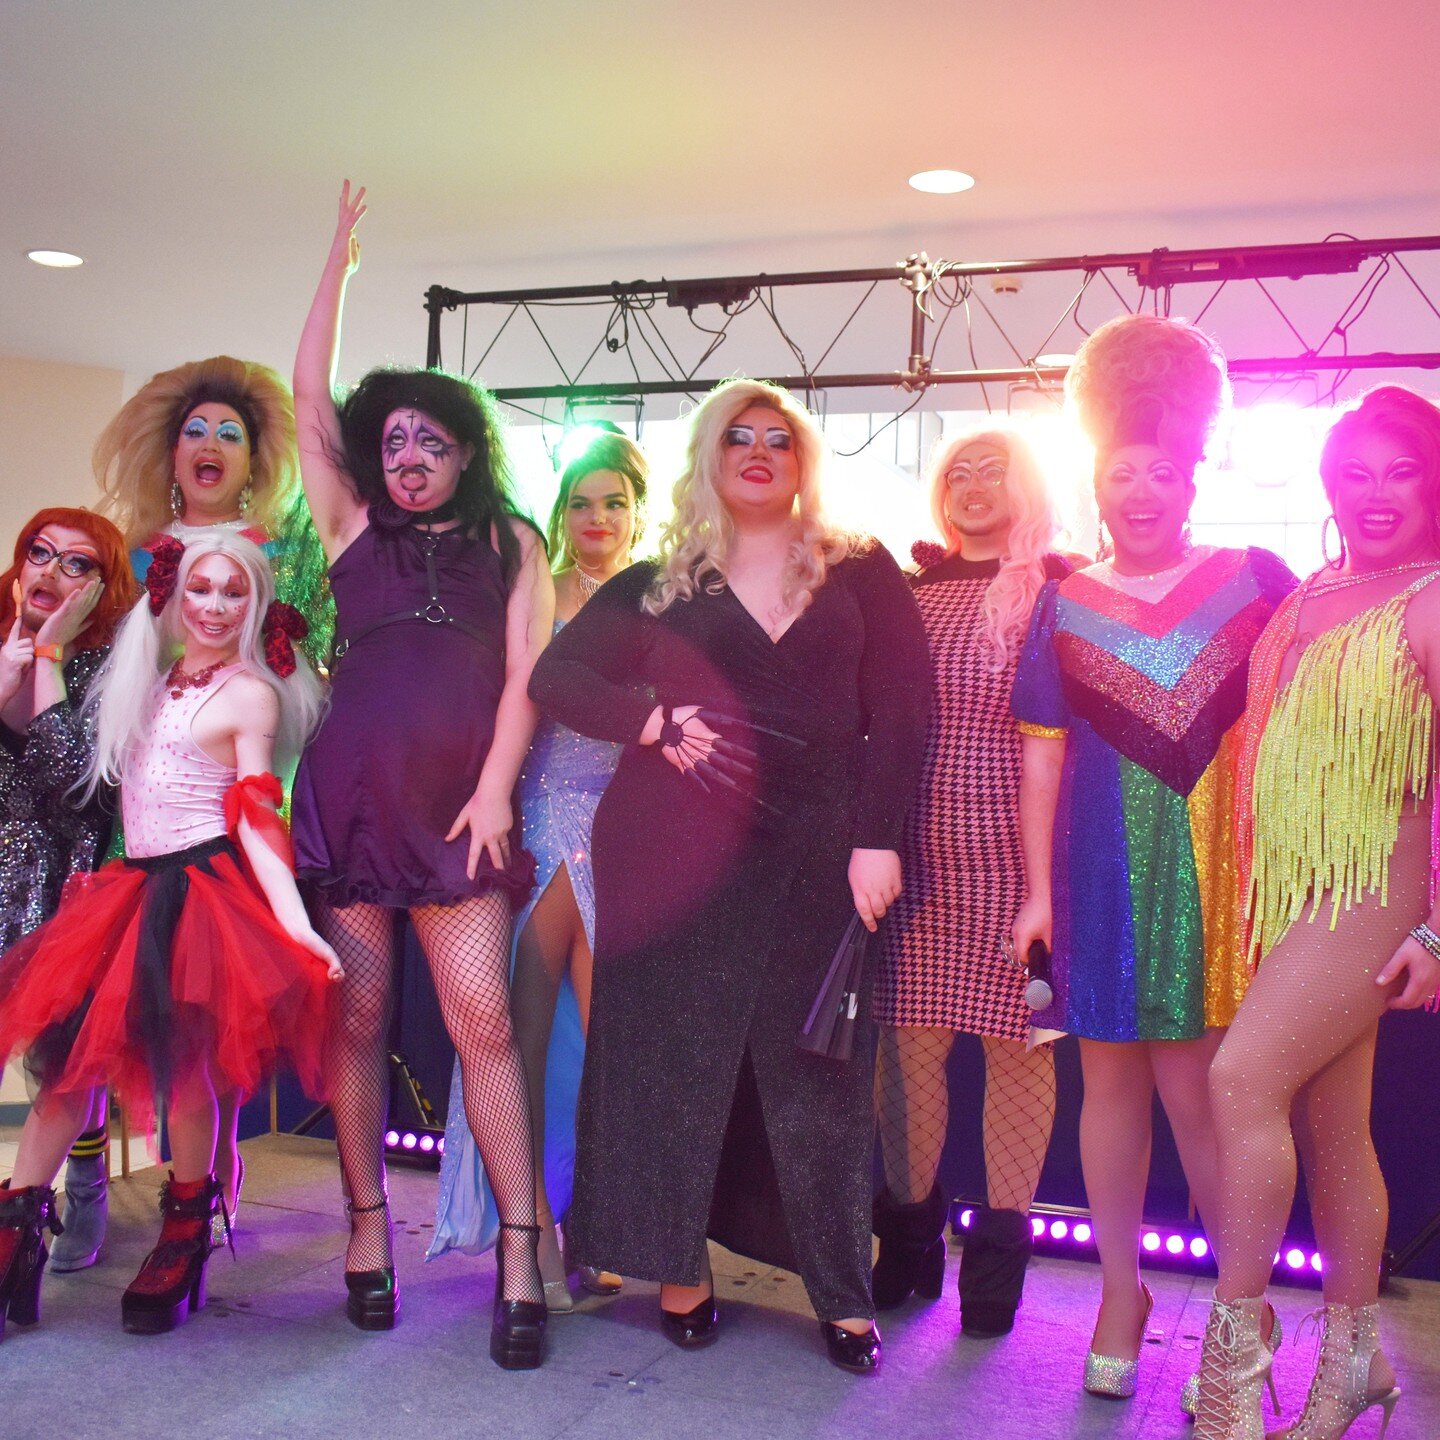 Grateful beyond words for the love, energy, and fierce vibes at our Drag Show on February 21st, 2024! 💃🌟 Huge thanks to everyone who came out to support, to all the incredible performers who lit up the stage, and to every soul who helped make this 